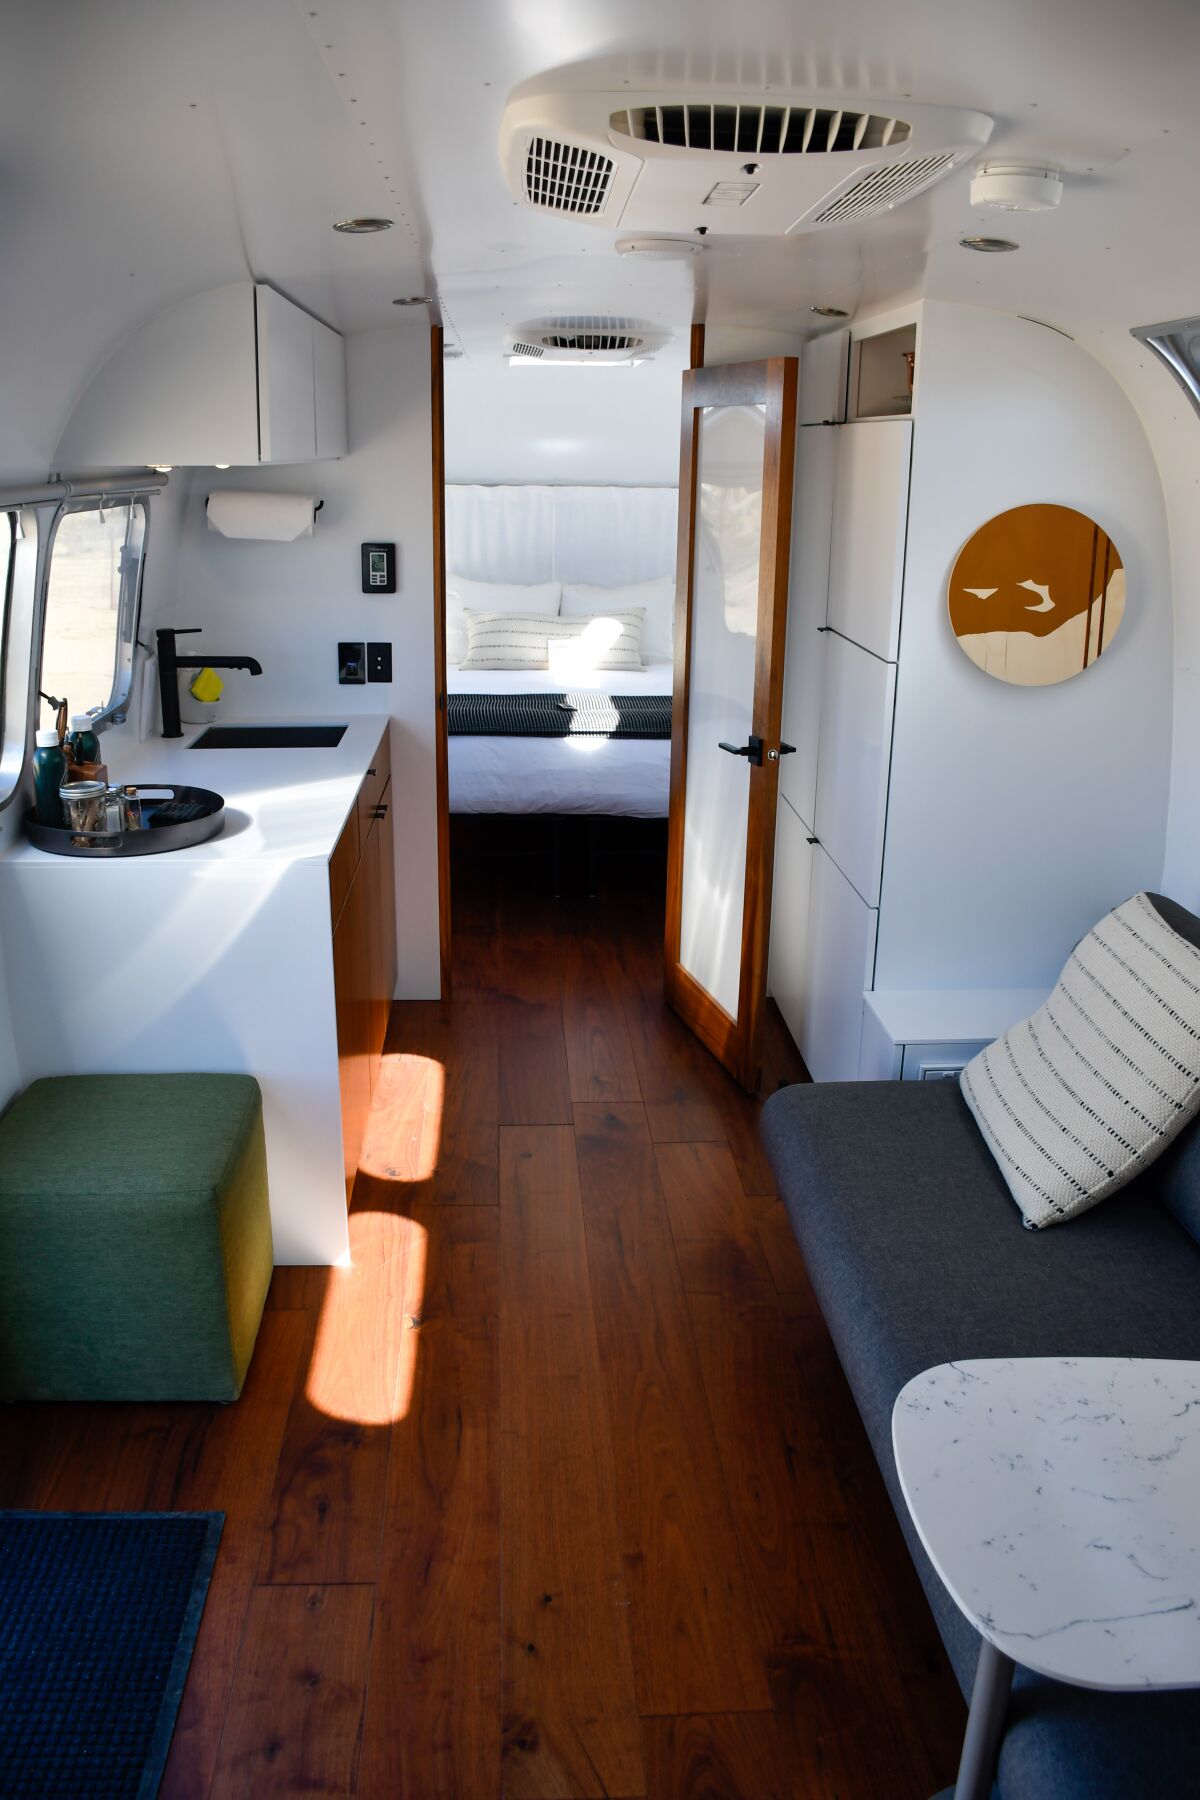 The interior of a furnished Airstream trailer.